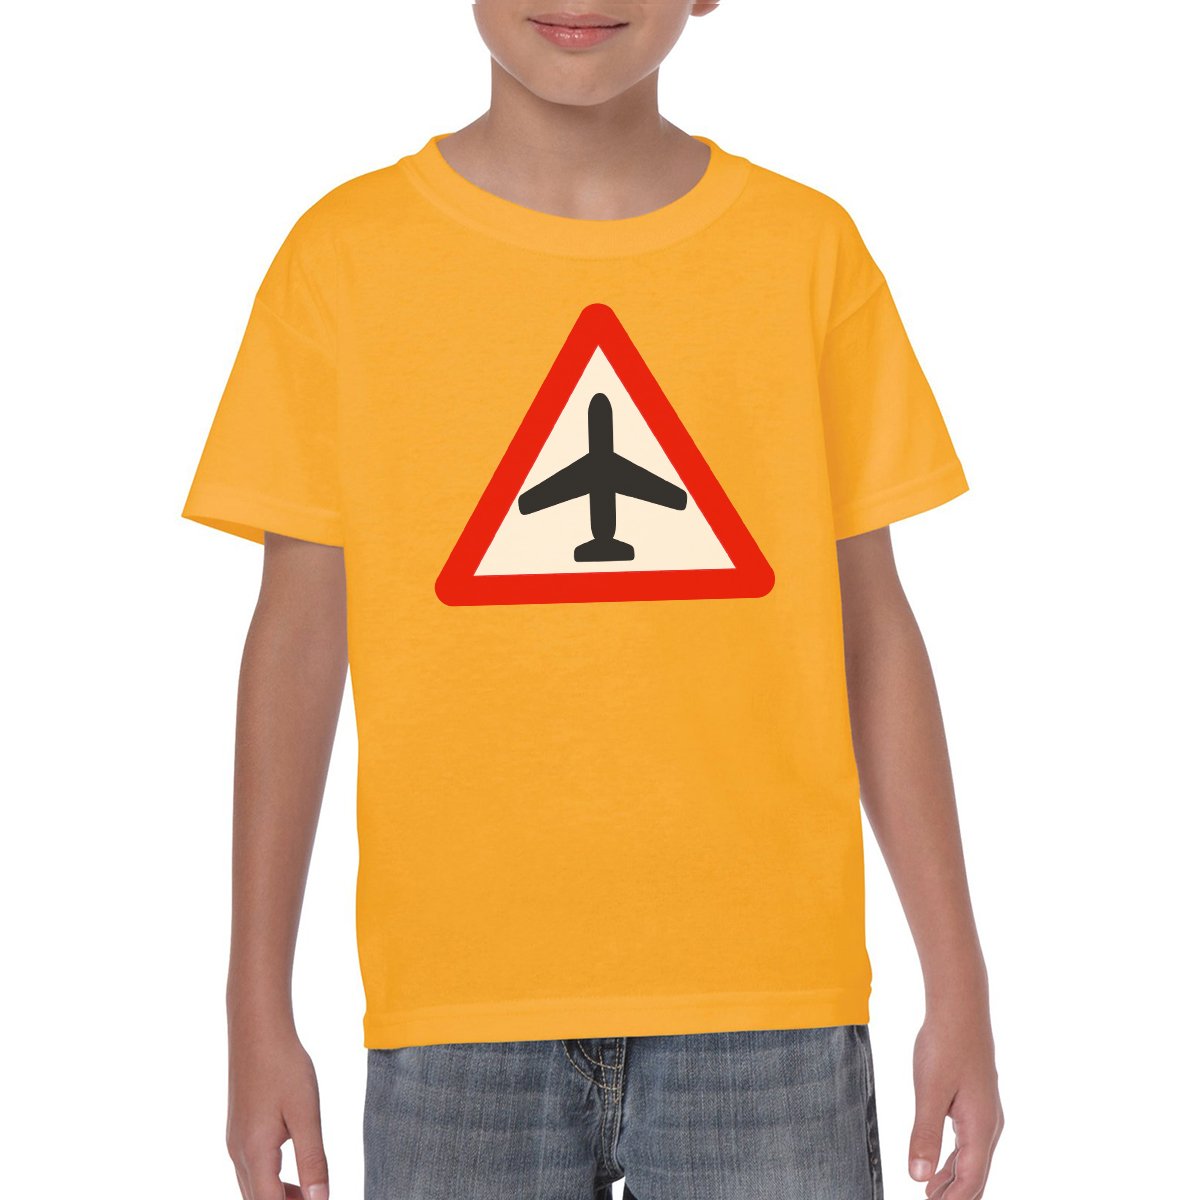 CAUTION AIRCRAFT Youth Semi-Fitted T-Shirt